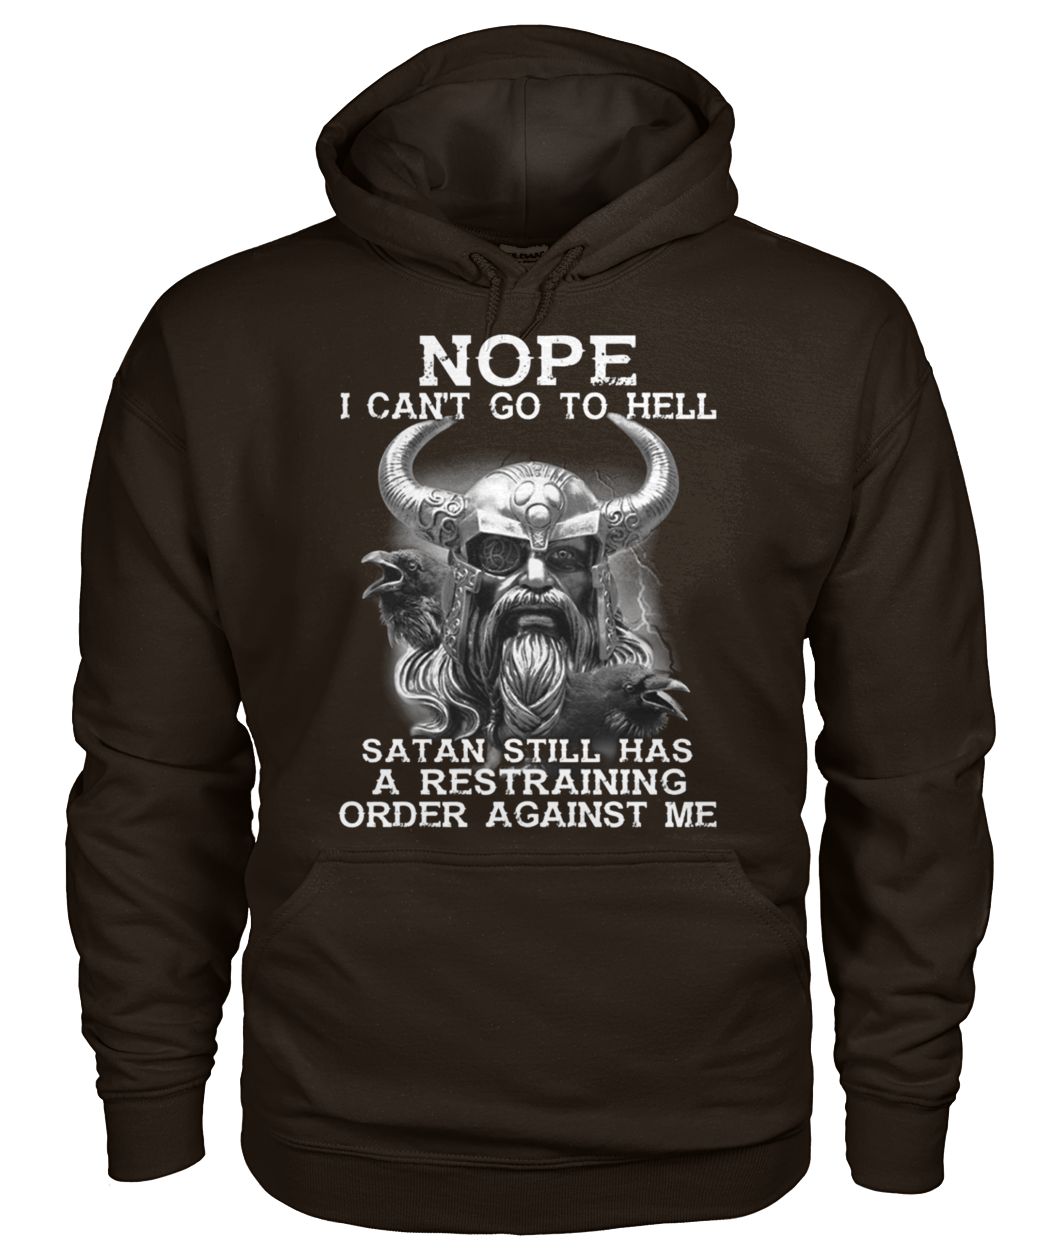 Viking nope I can't go to hell satan still has a restraining order against me gildan hoodie